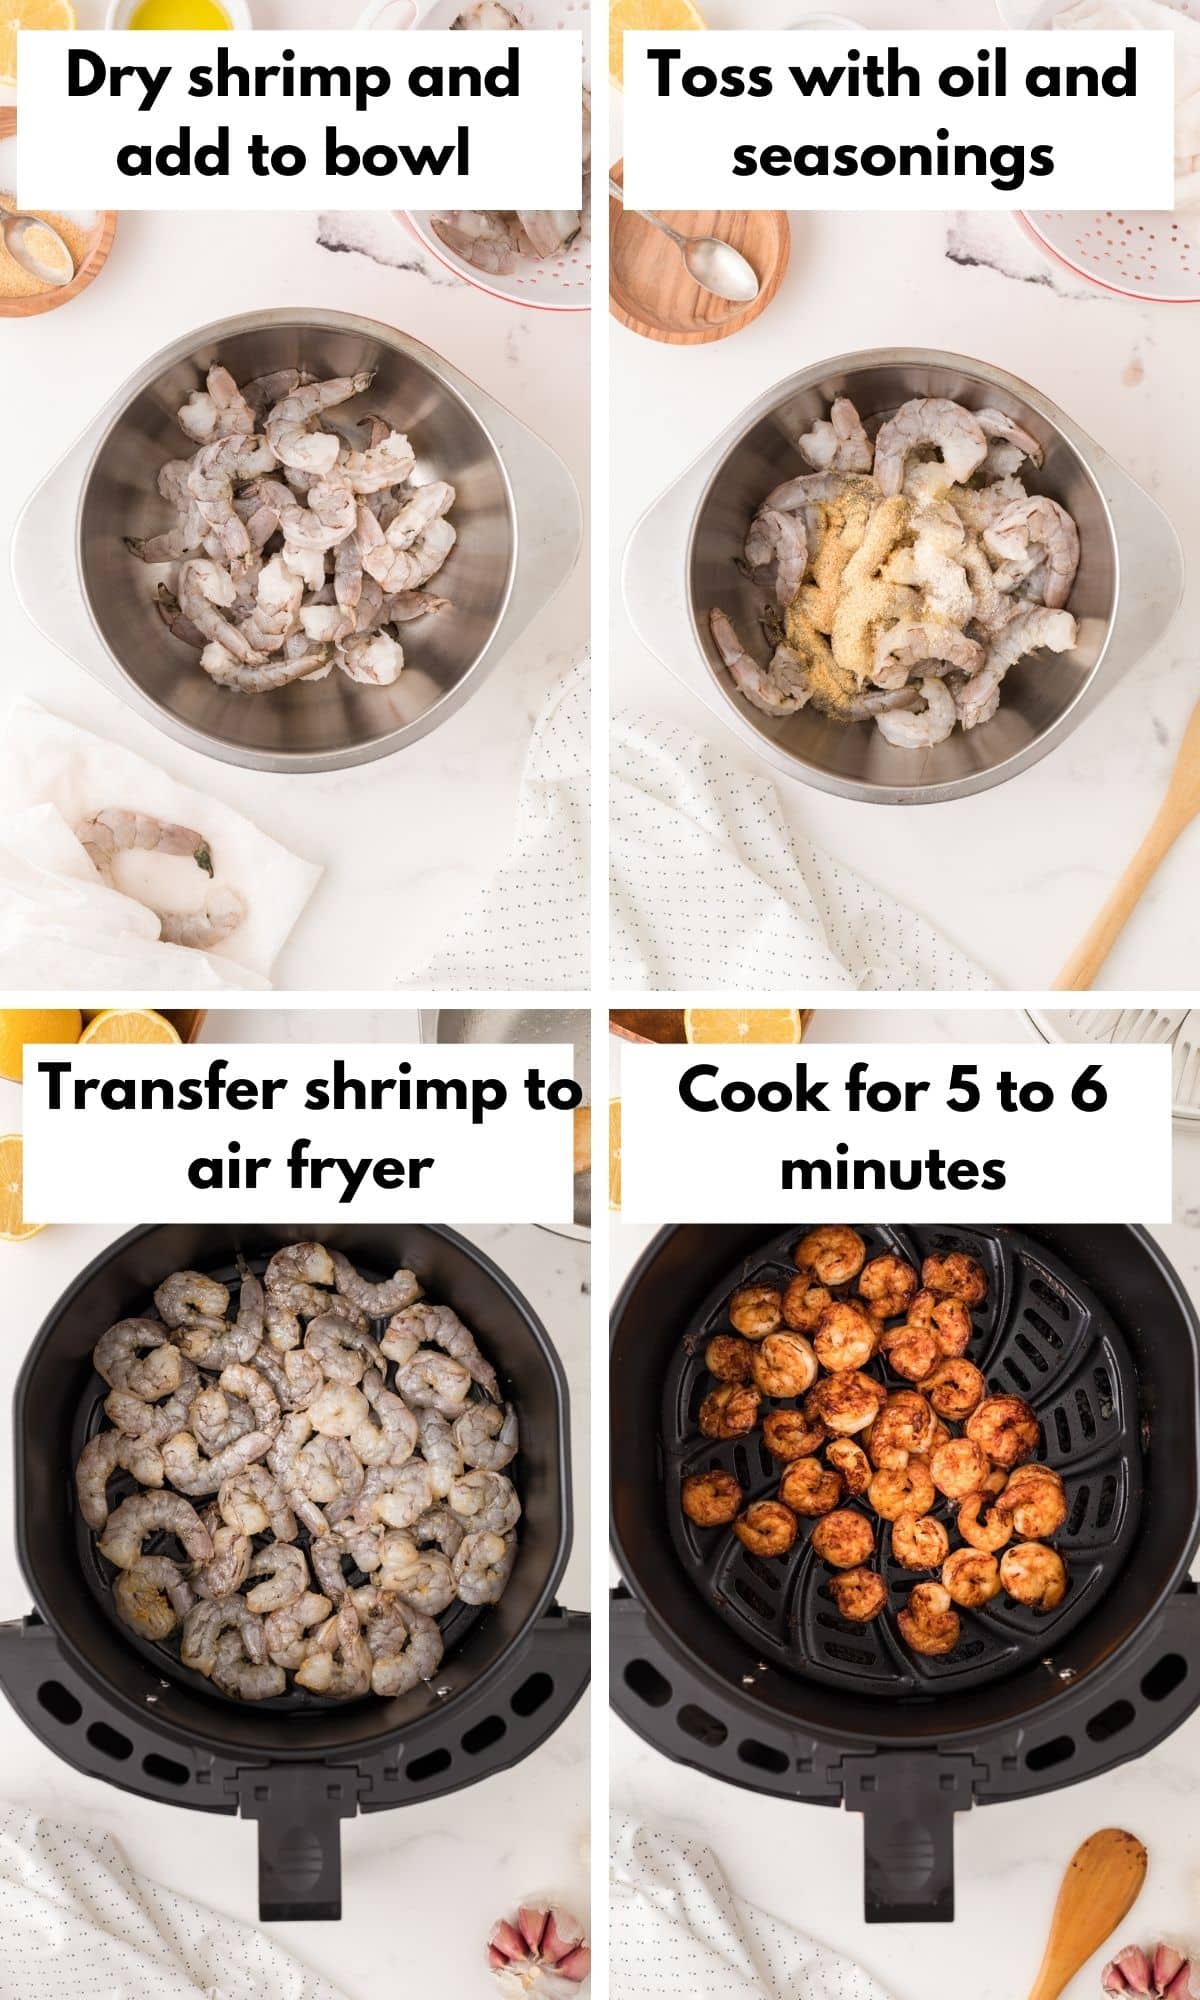 Pictures showing how to cook shrimp in air fryer